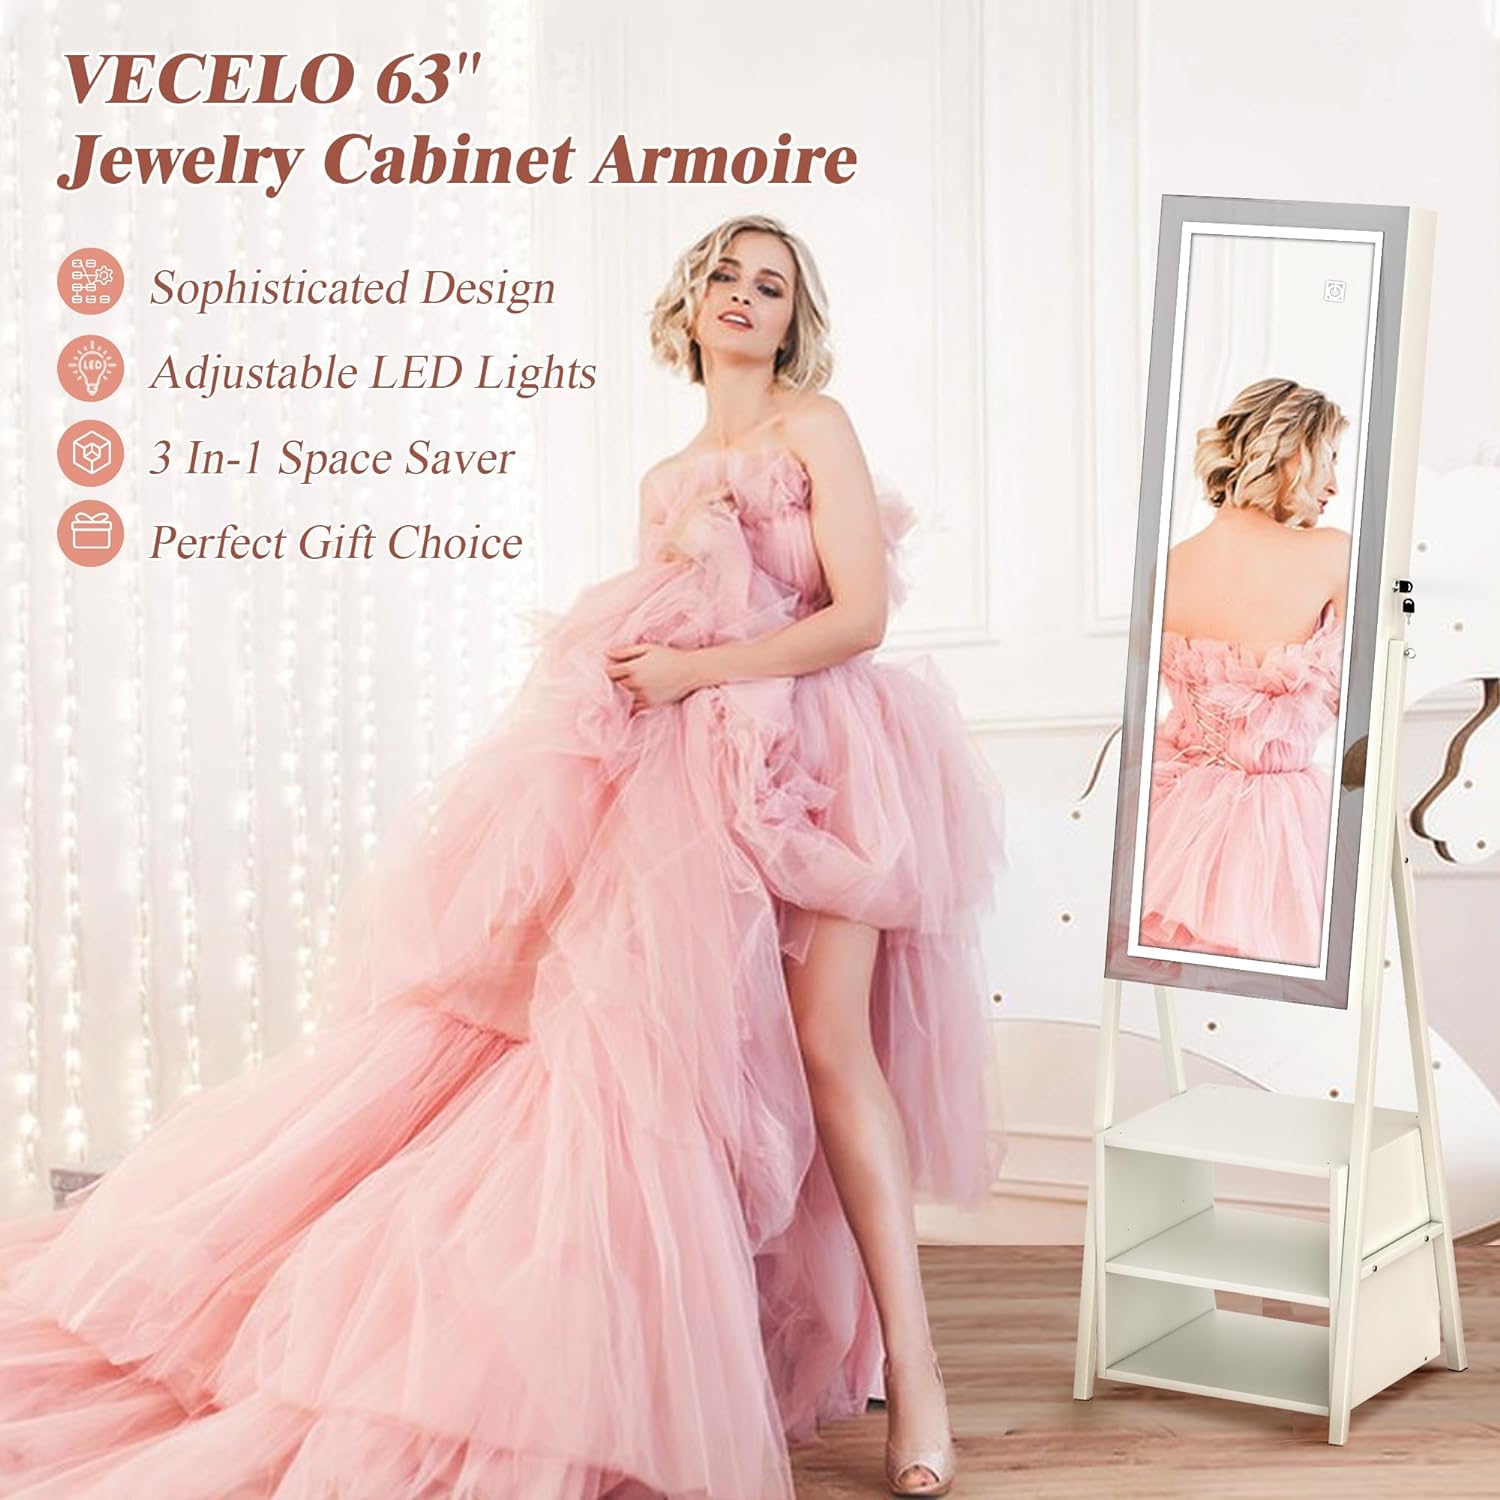 VECELO Jewelry Cabinet Armoire with Adjustable LED Lights